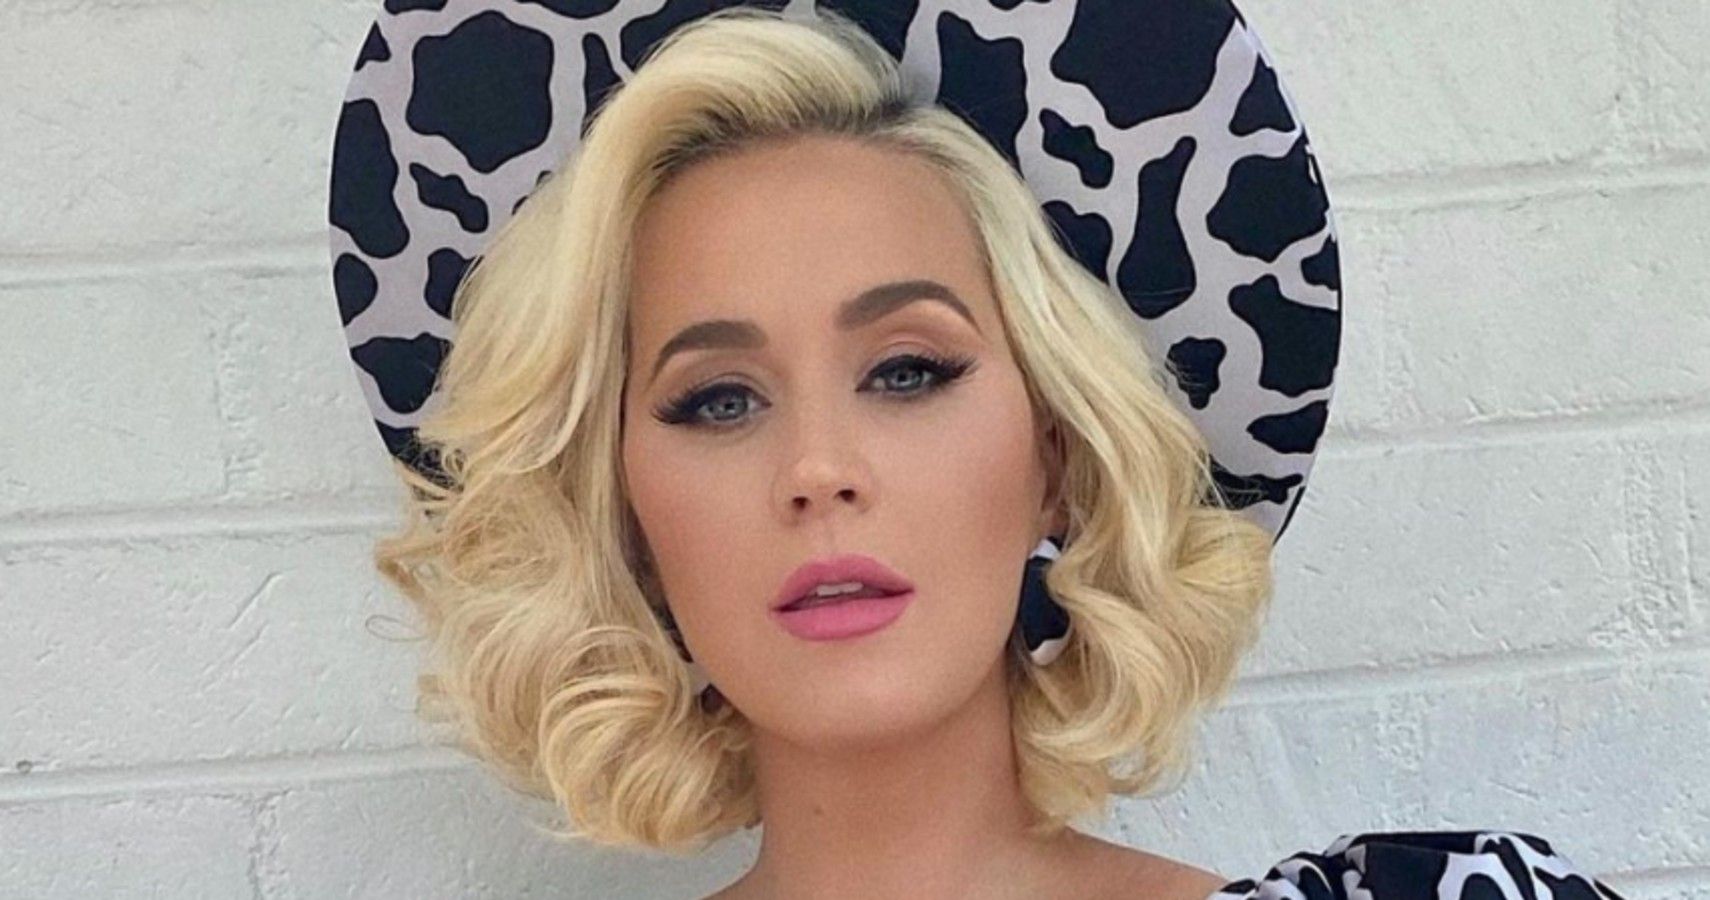 Katy Perrys Weight Loss How She Got Back In Shape After Giving Birth 